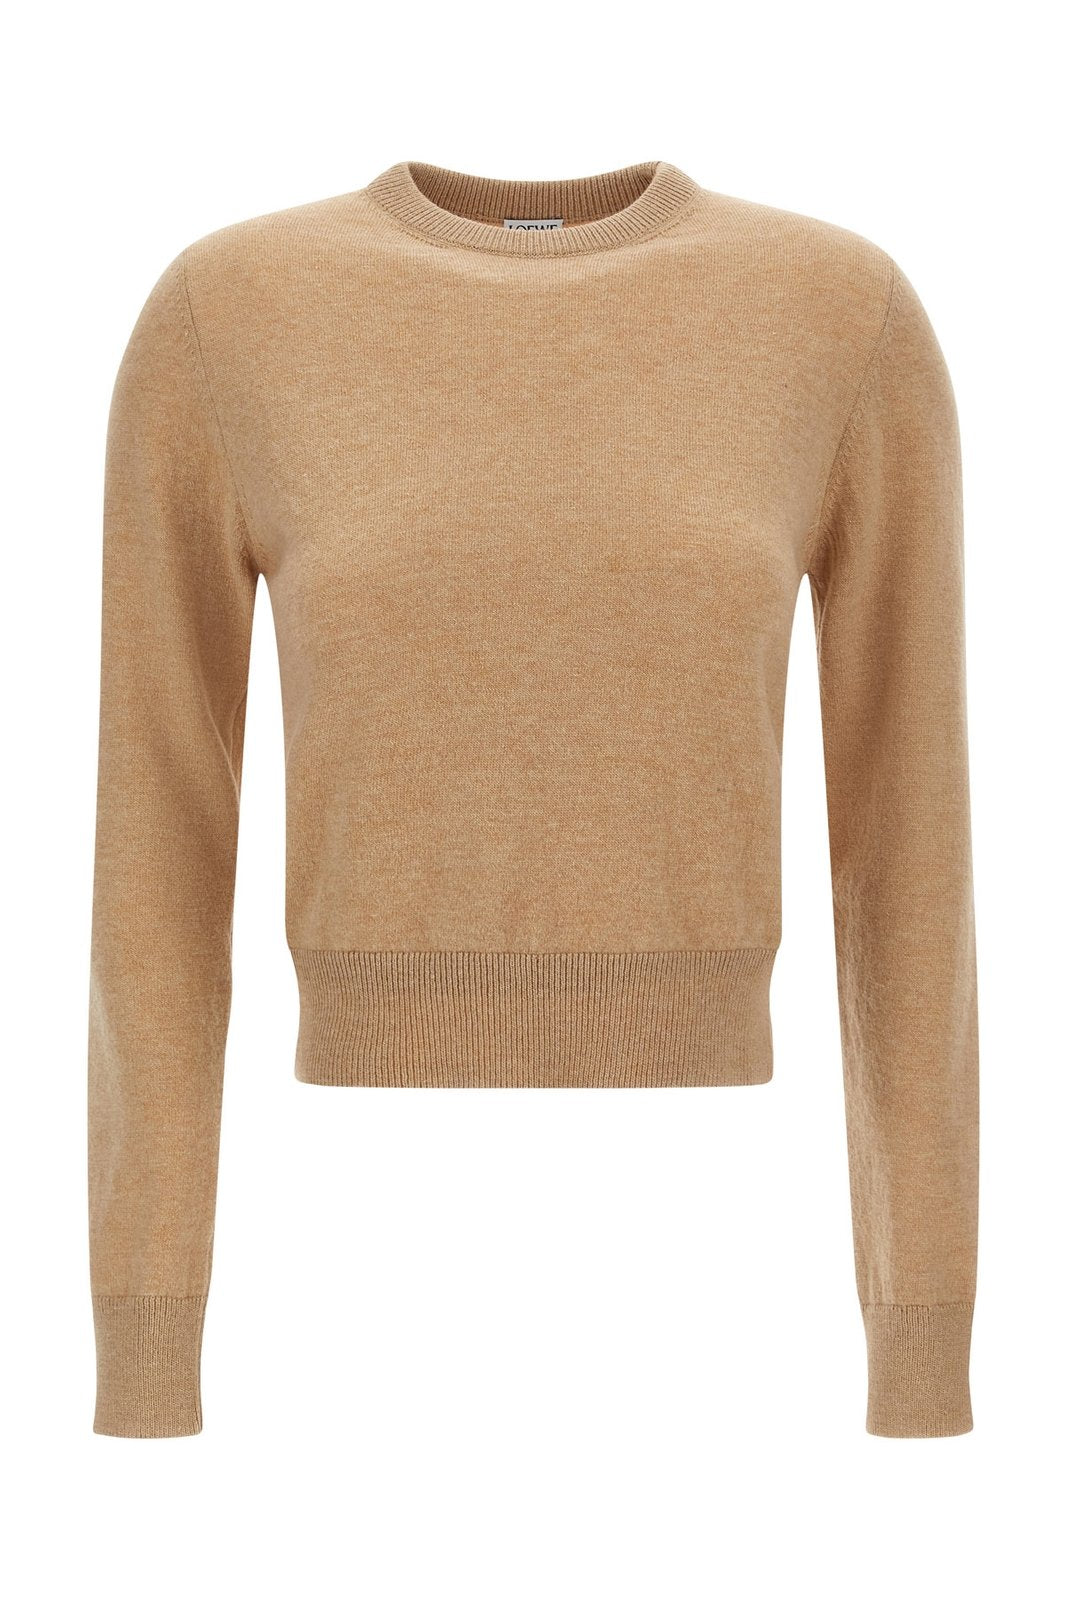 Loewe Twisted Cut-Out Back Sweater